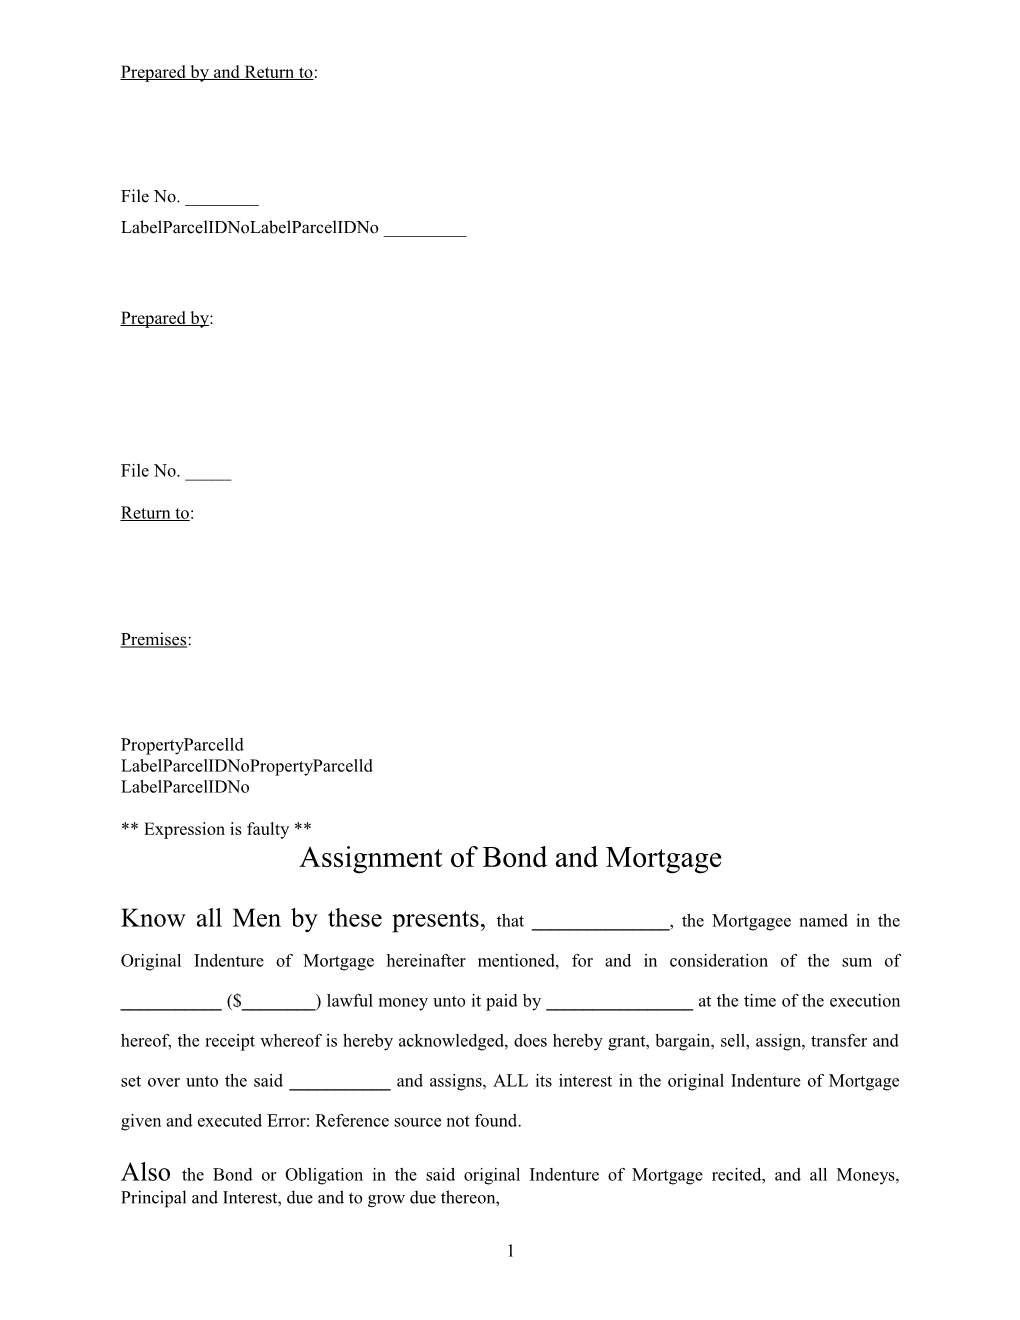 Assignment of Bond and Mortgage